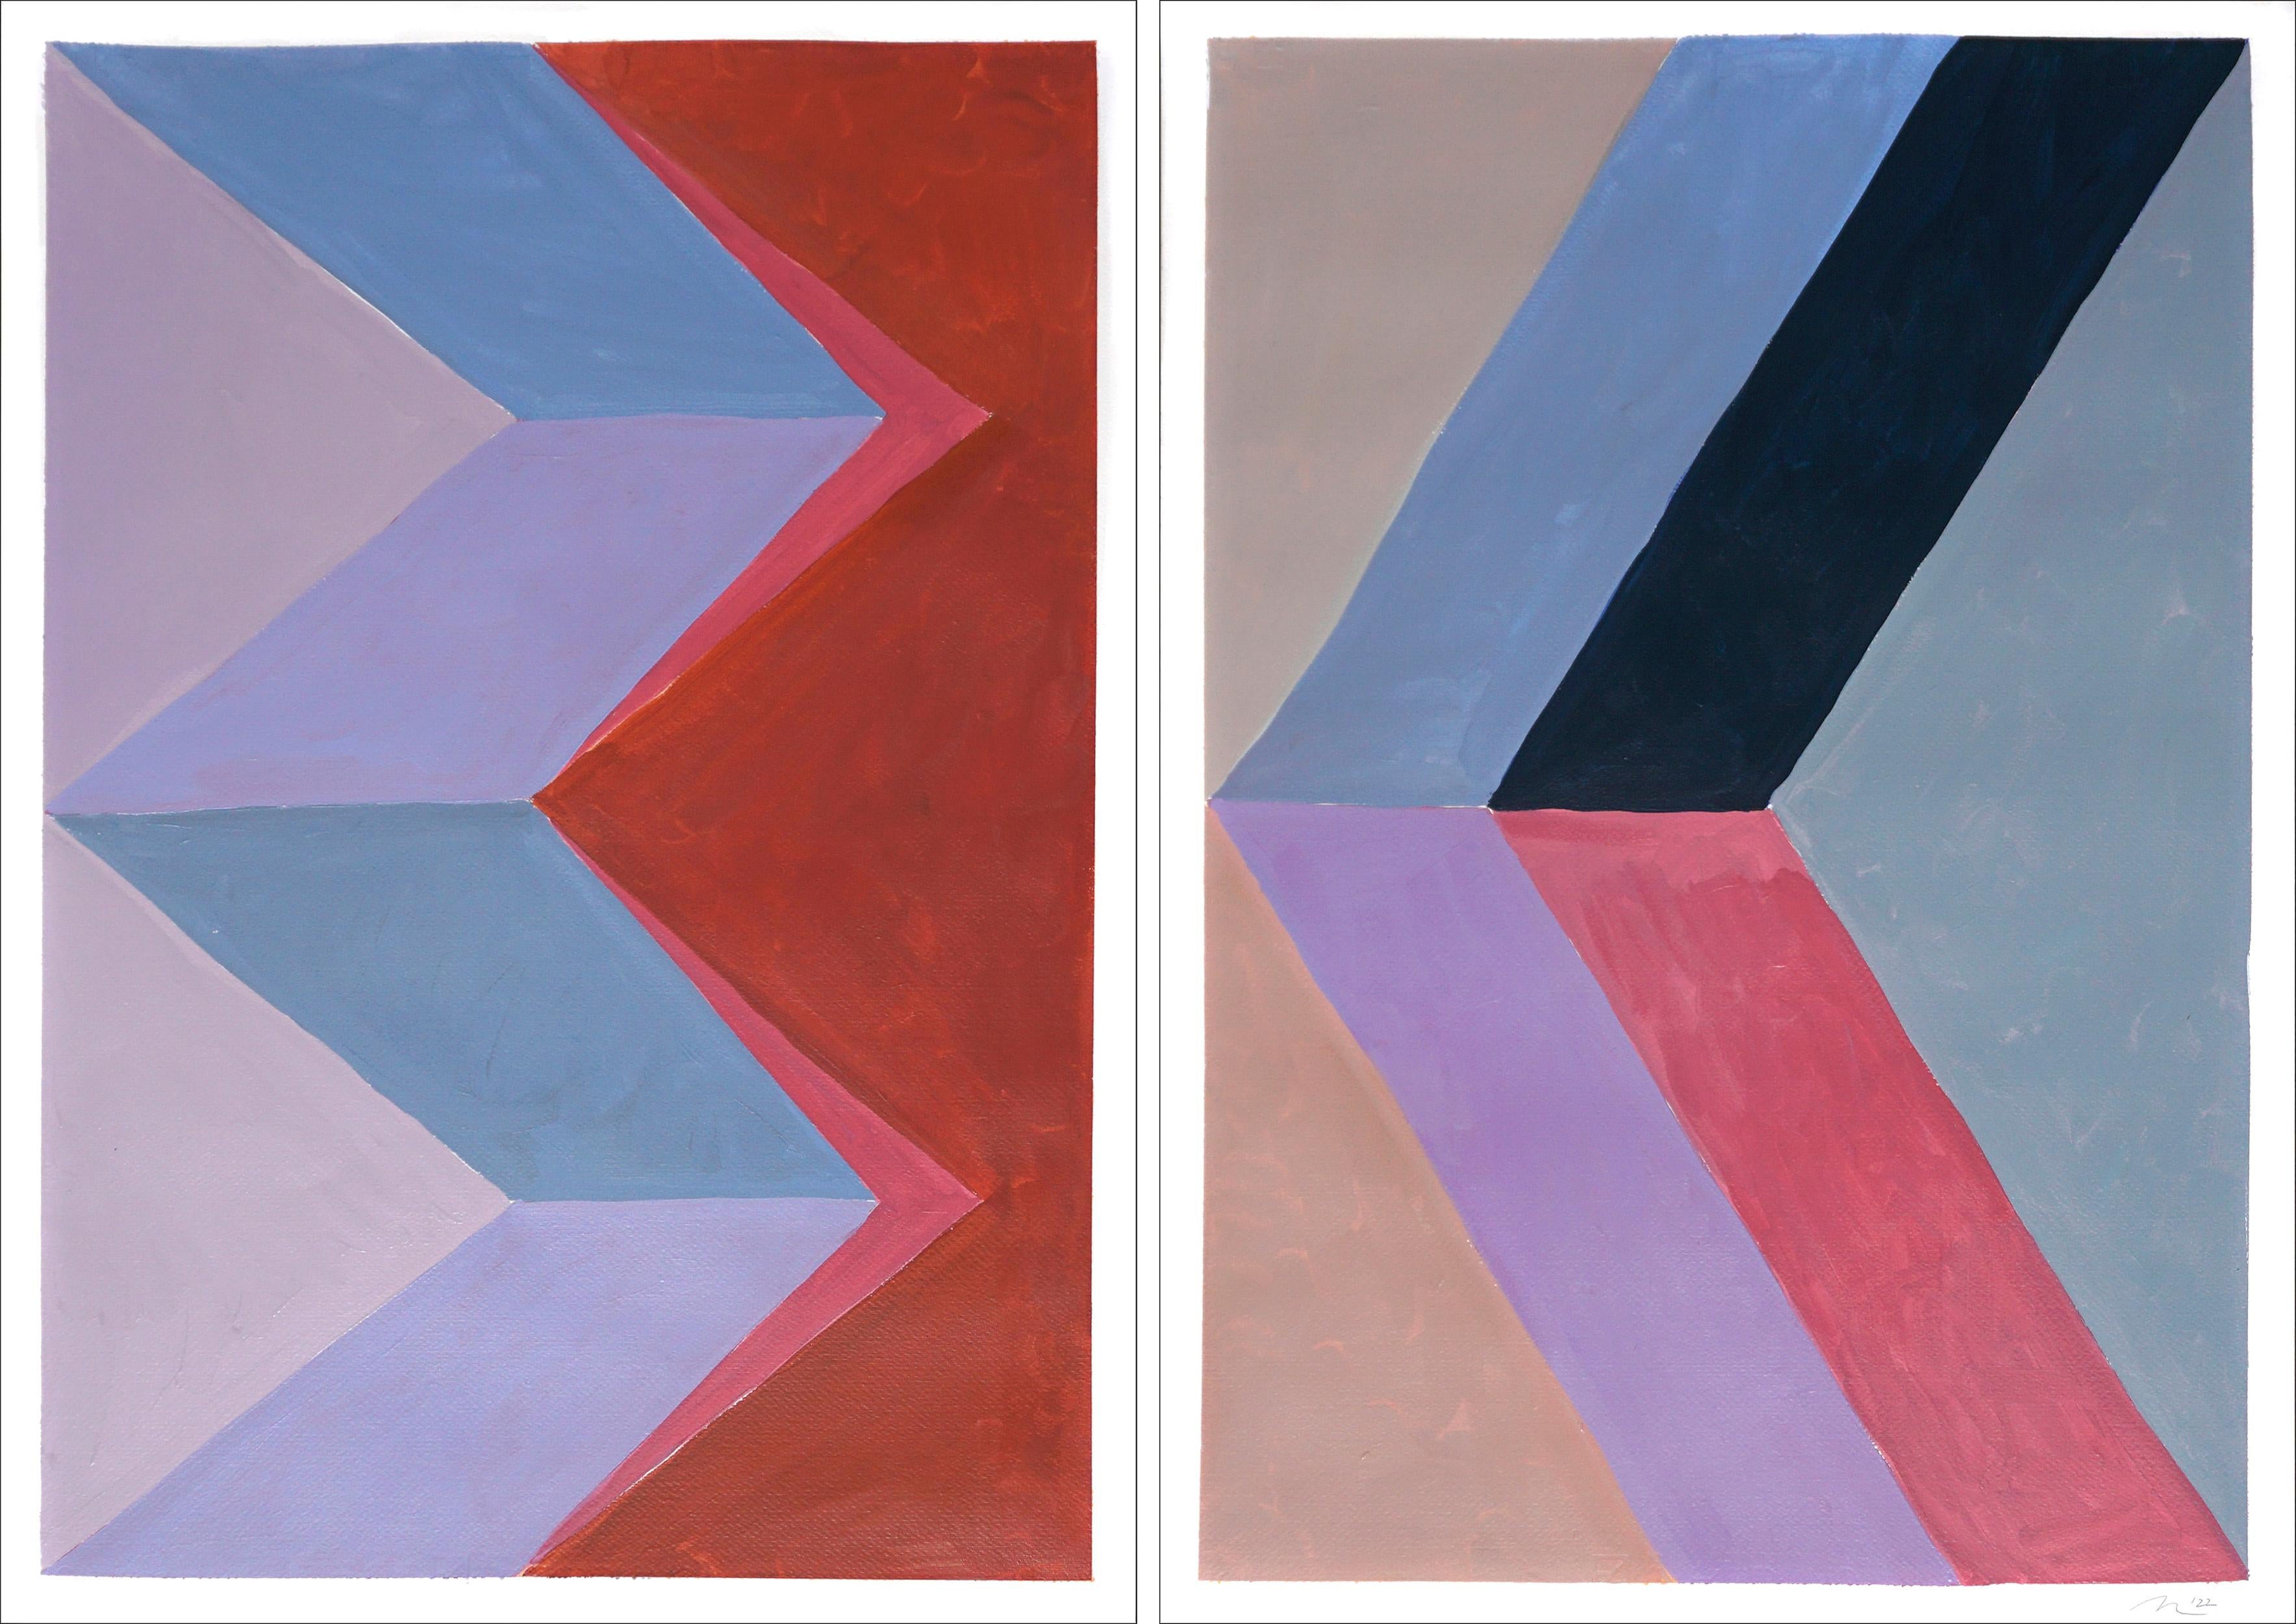 Natalia Roman Abstract Painting - Rhombus Color Study, Pastel Tones Brutalist Geometry, Gray, Blue, PInk, Diptych 